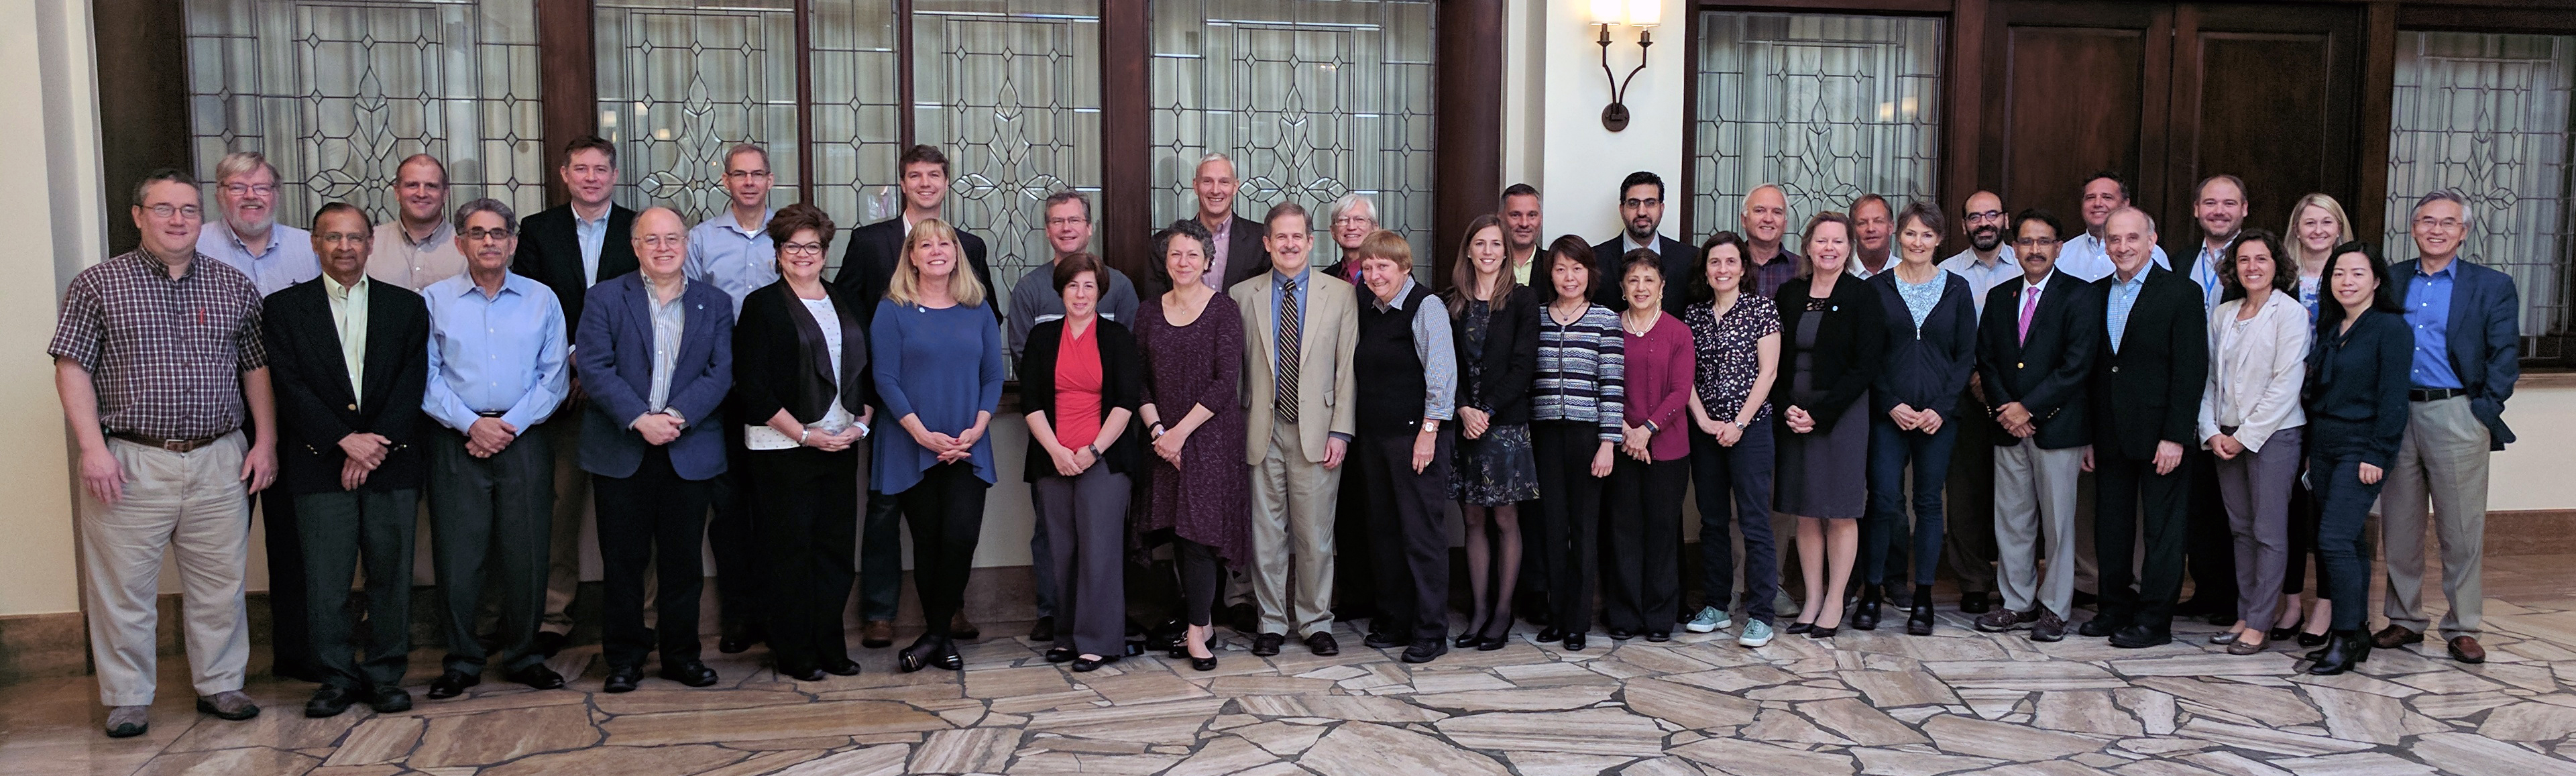 AAPM Board of Directors, Spring Clinical Meeting, March 2017